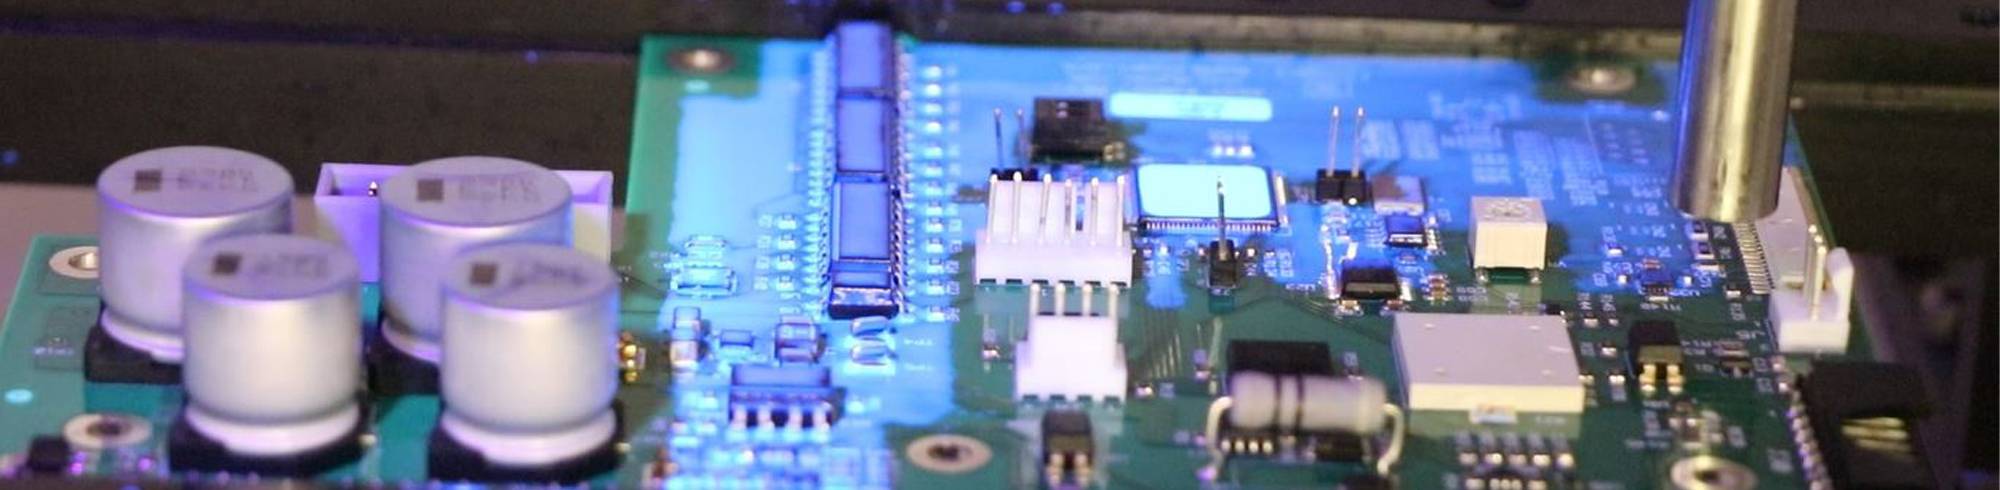 Light curable coatings for industrial bonding shown on PCB board